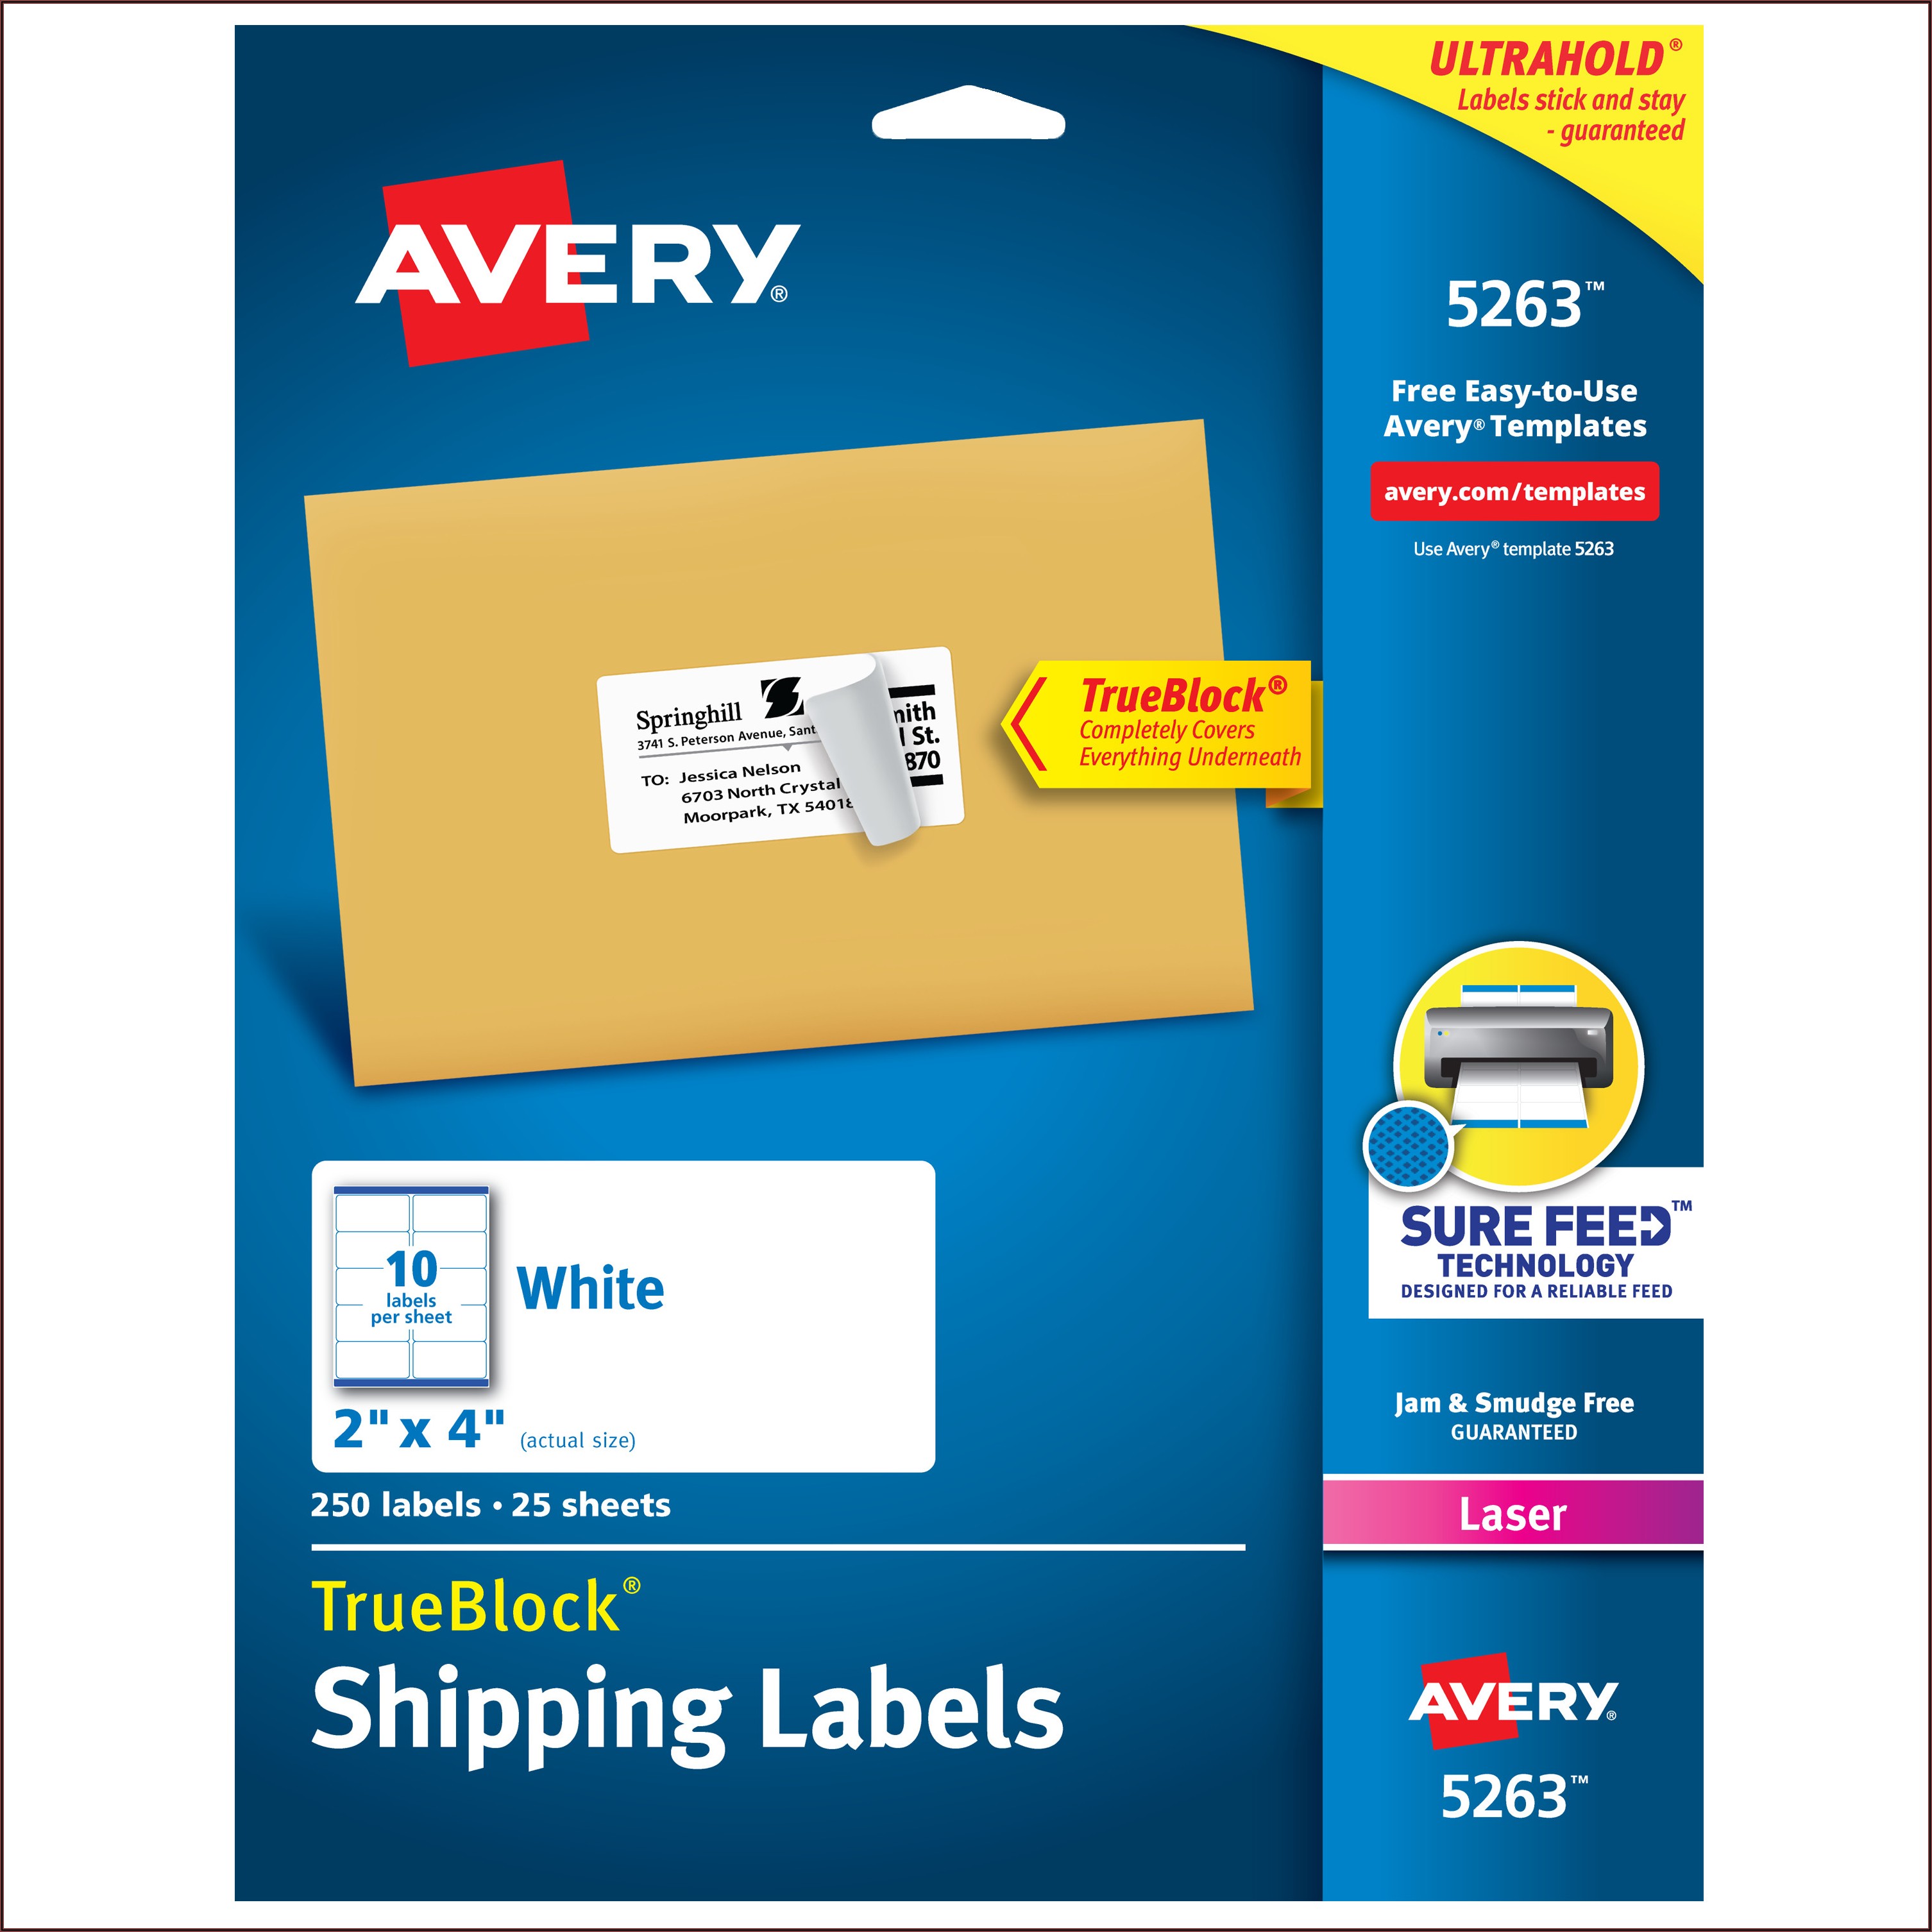 Avery Labels 30603 Template